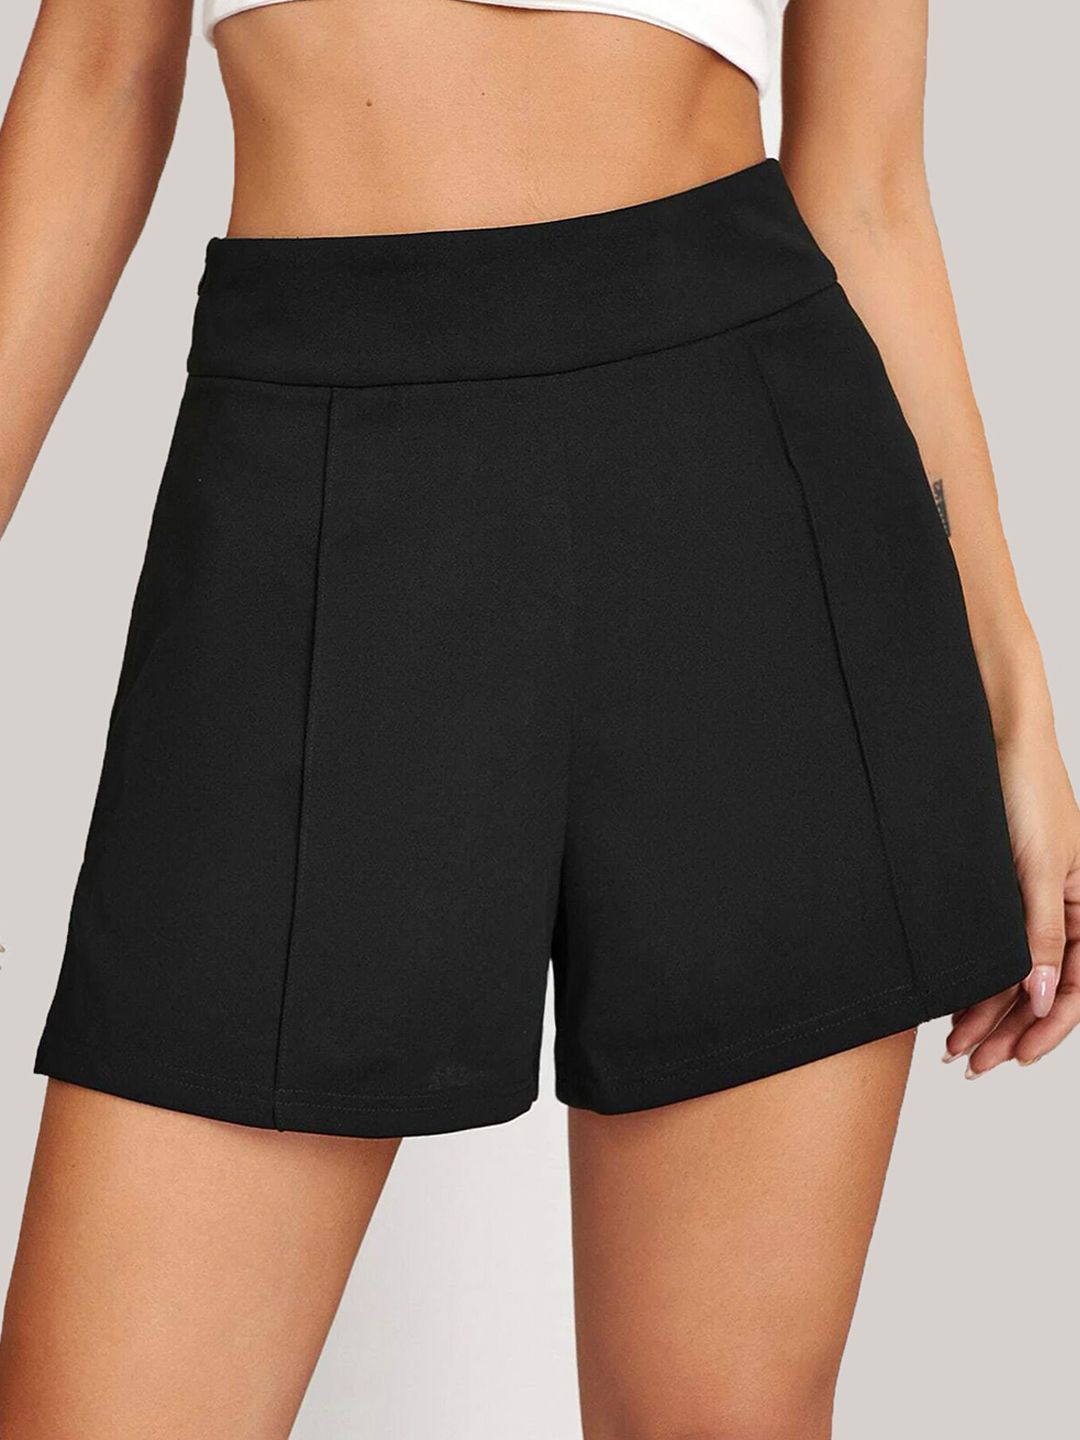 ADDYVERO Women Black Loose Fit High-Rise Sports Shorts Price in India